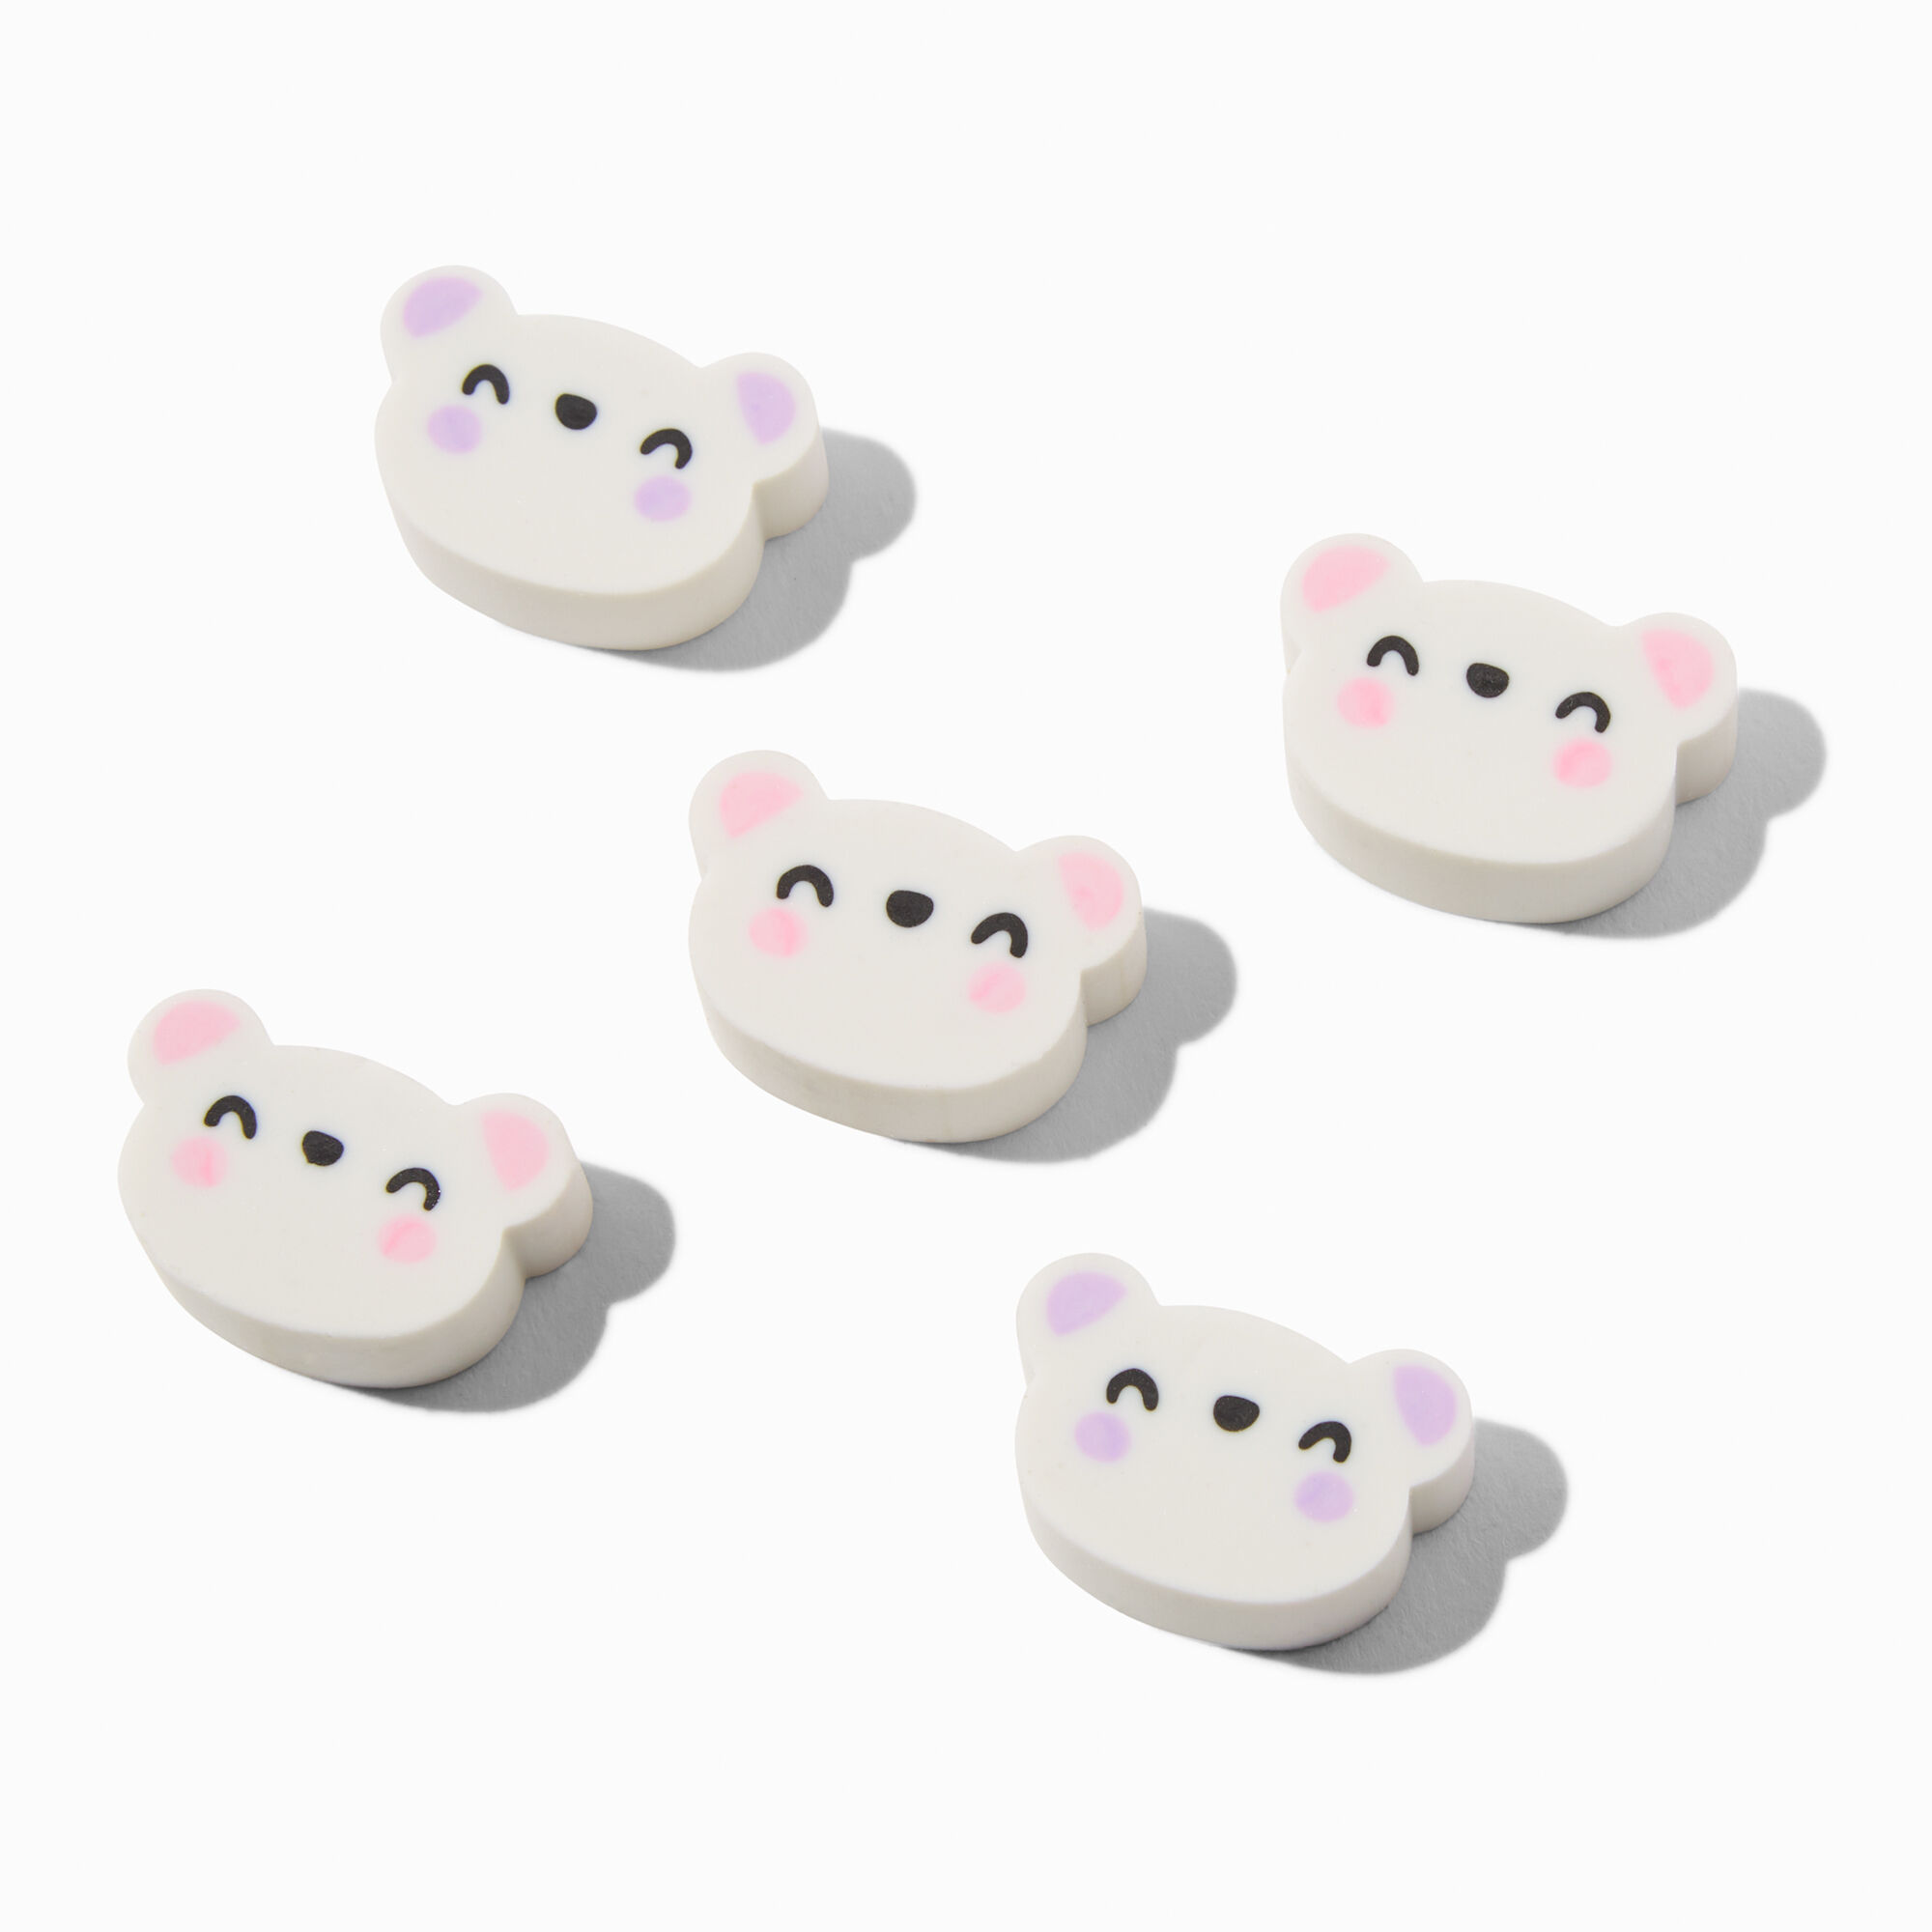 claire's sweet bears erasers - 5 pack